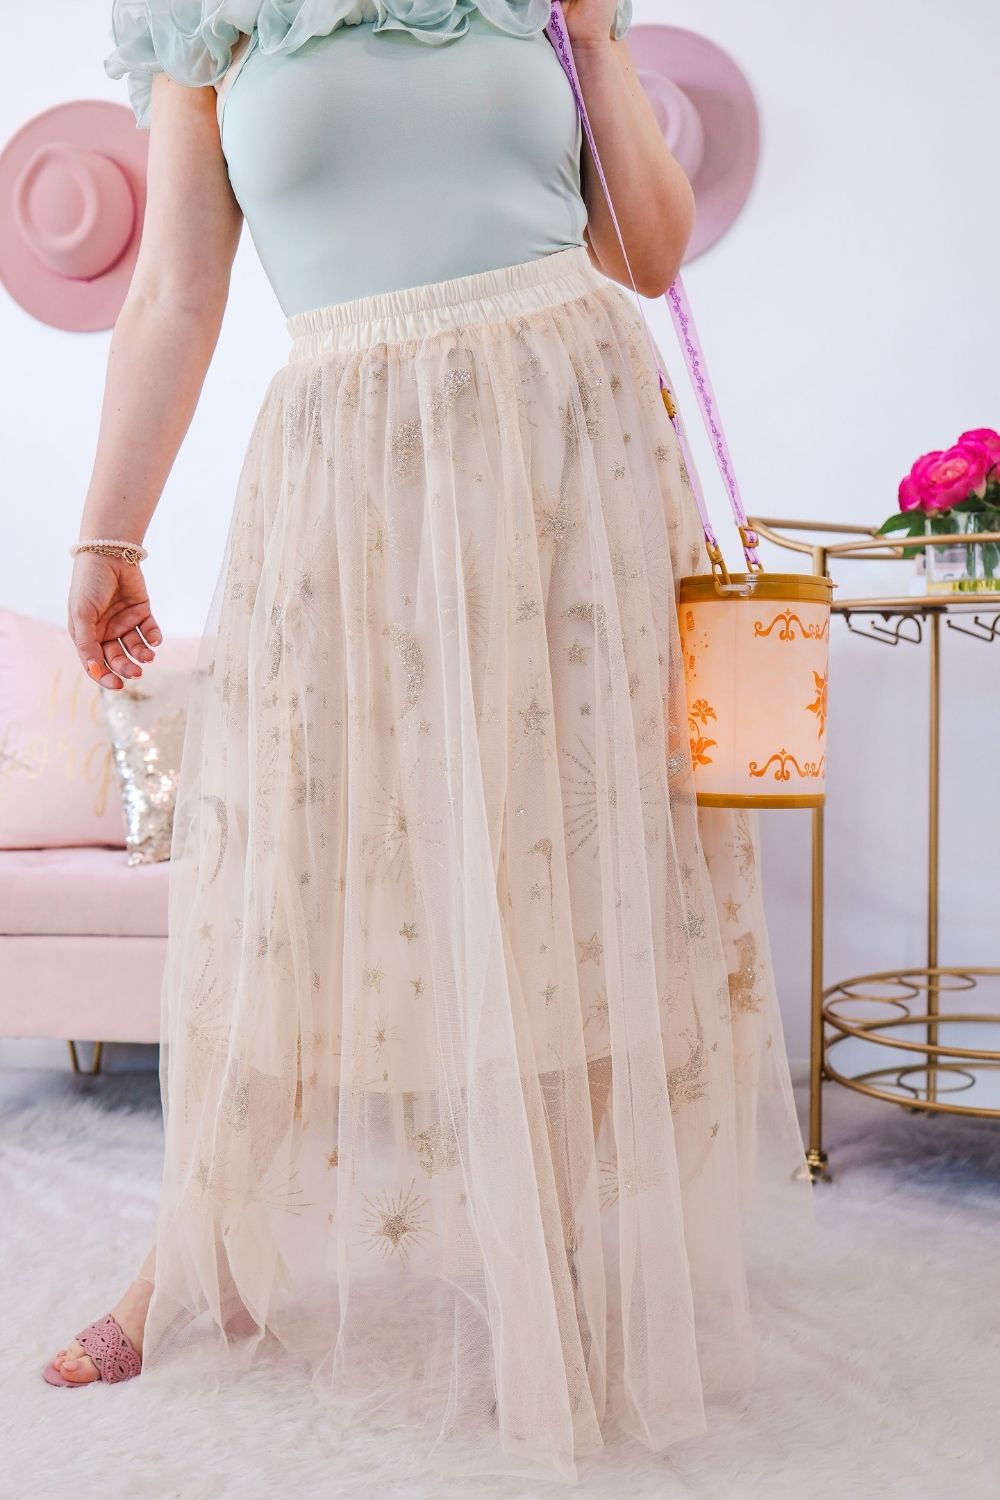 BRING ME TO NABOO SKIRT *